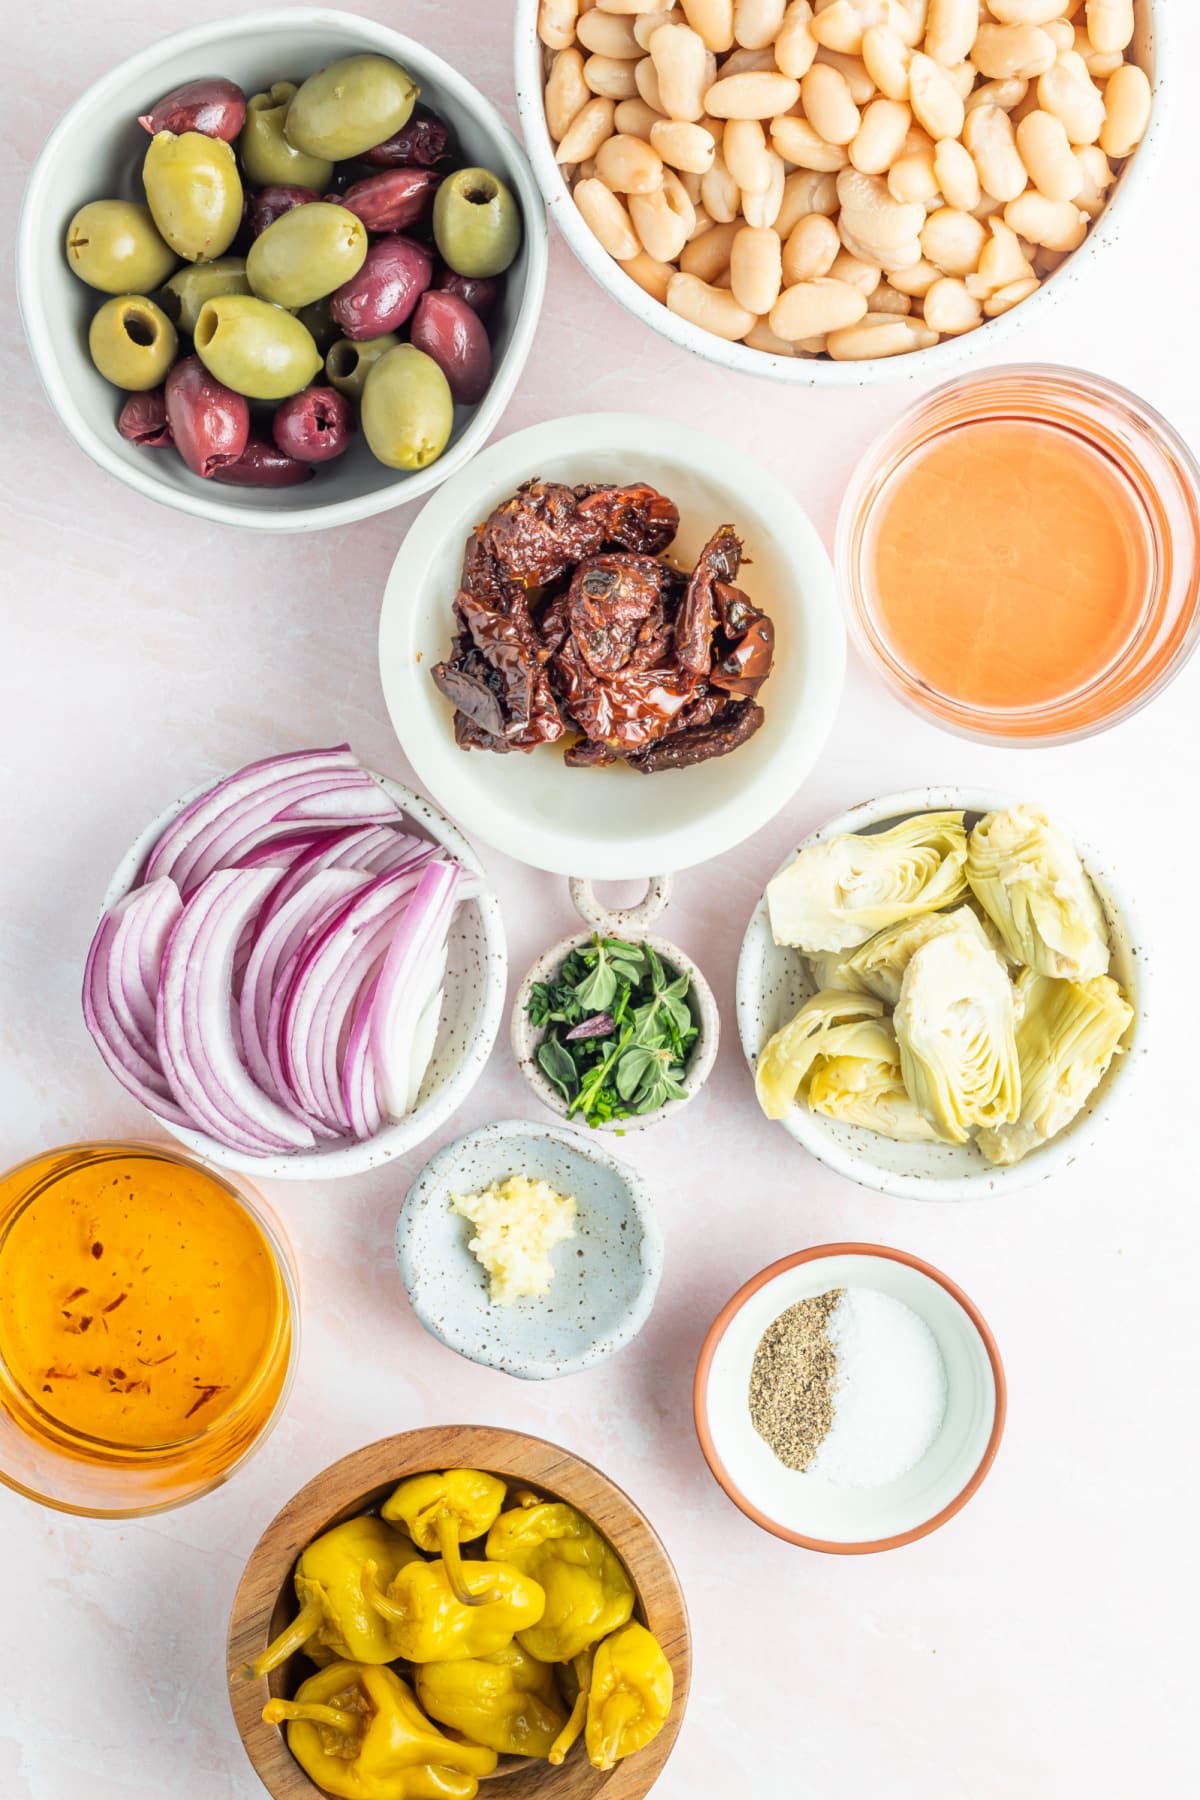 Overhead view of separate bowls of ingredients for a white bean antipasto salad, including black kalamata and green castelvetrano olives, white beans, sun dried tomatoes, sliced artichoke hearts, sliced red onion, pepperoncini peppers, herbs and spices.